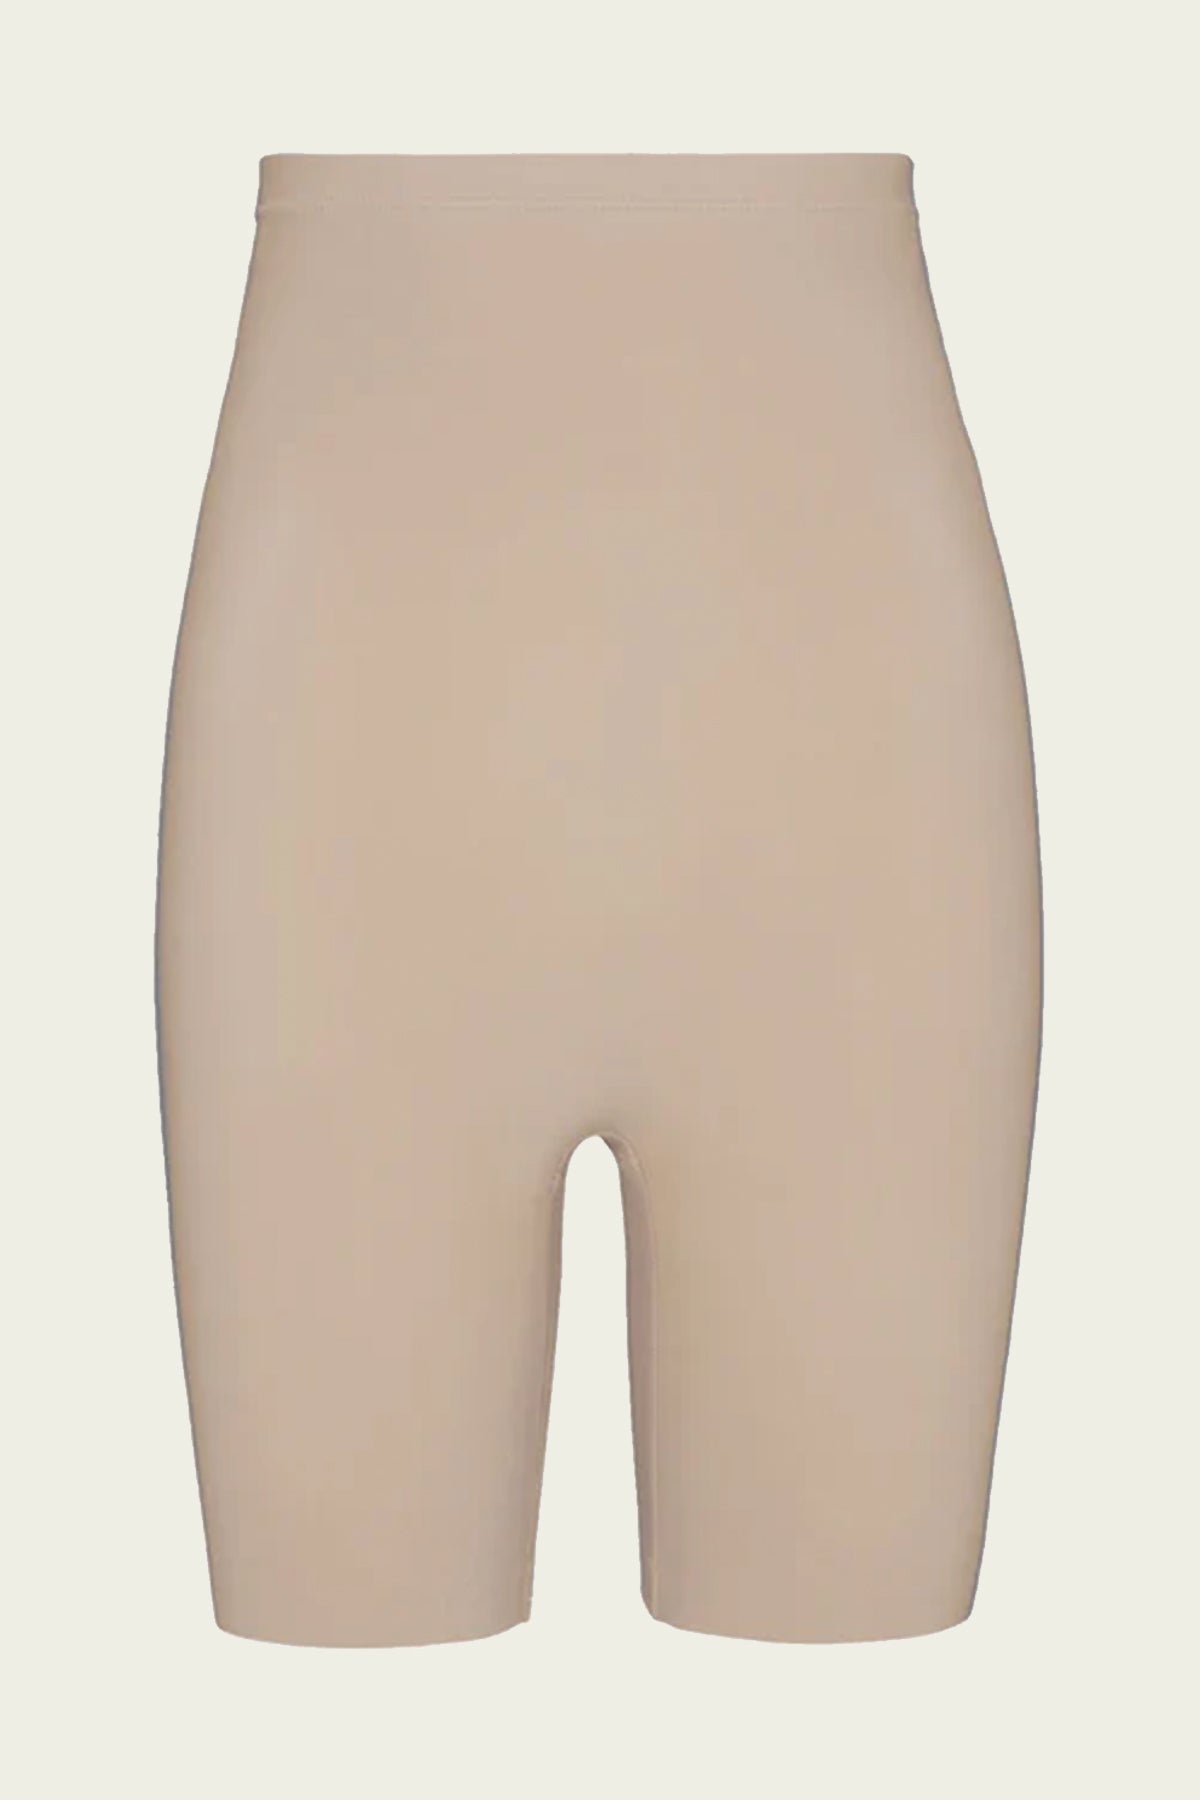 Classic Control High-Waisted Short in Beige - shop-olivia.com